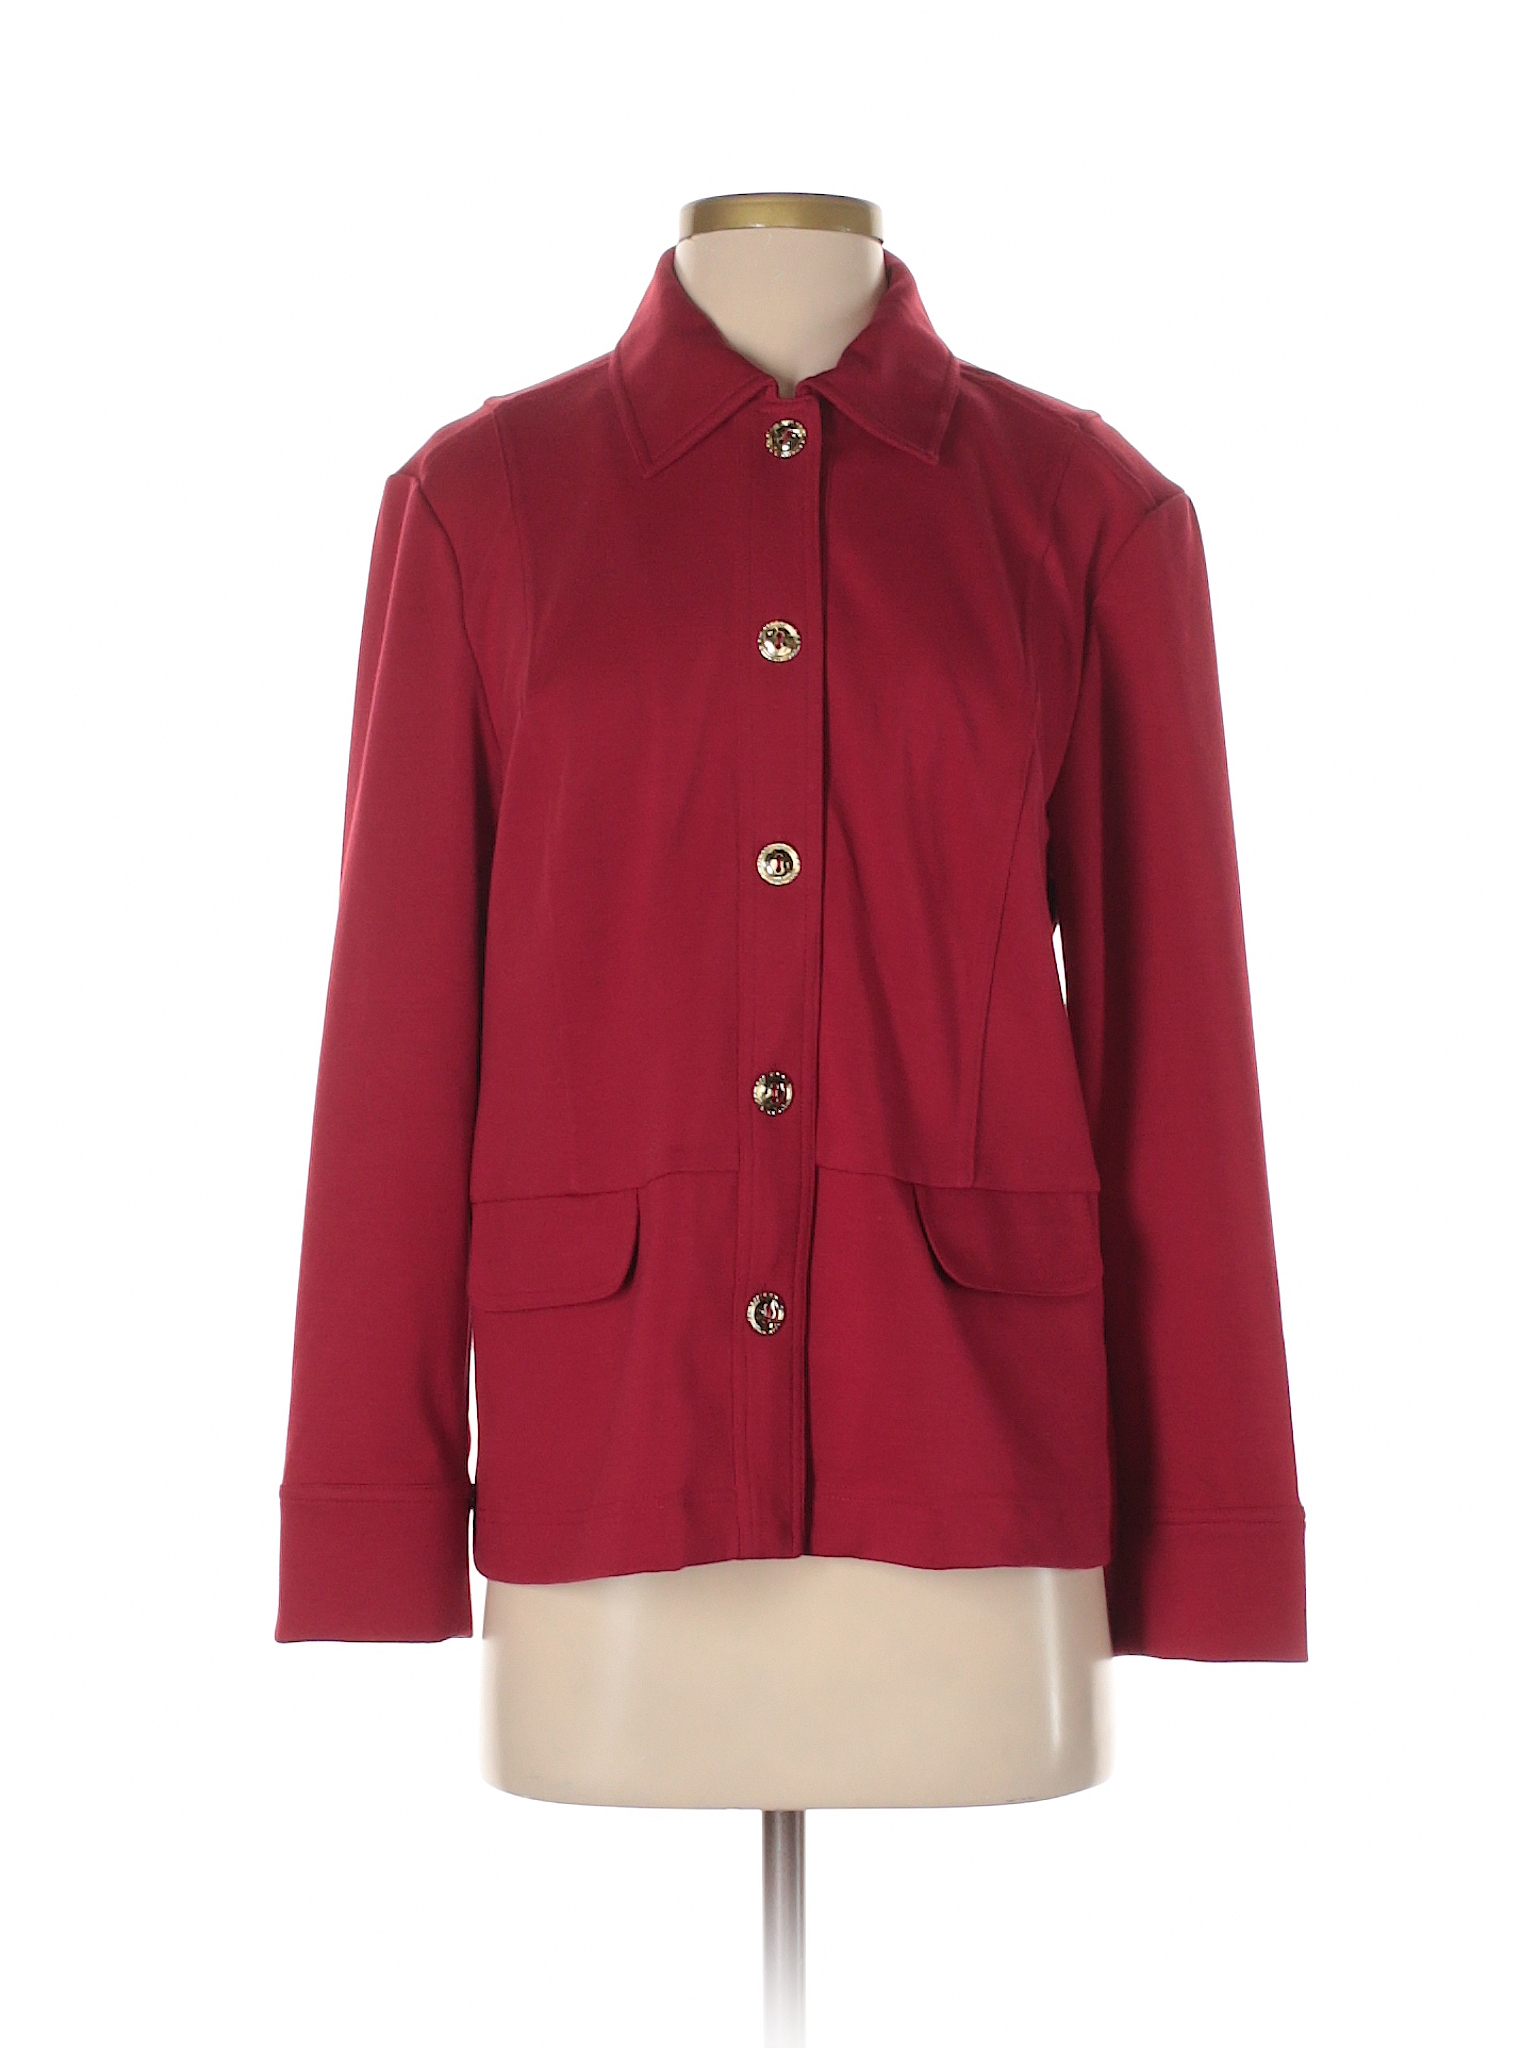 Brownstone Studio New York Solid Red Jacket Size M (Petite) - 90% off ...